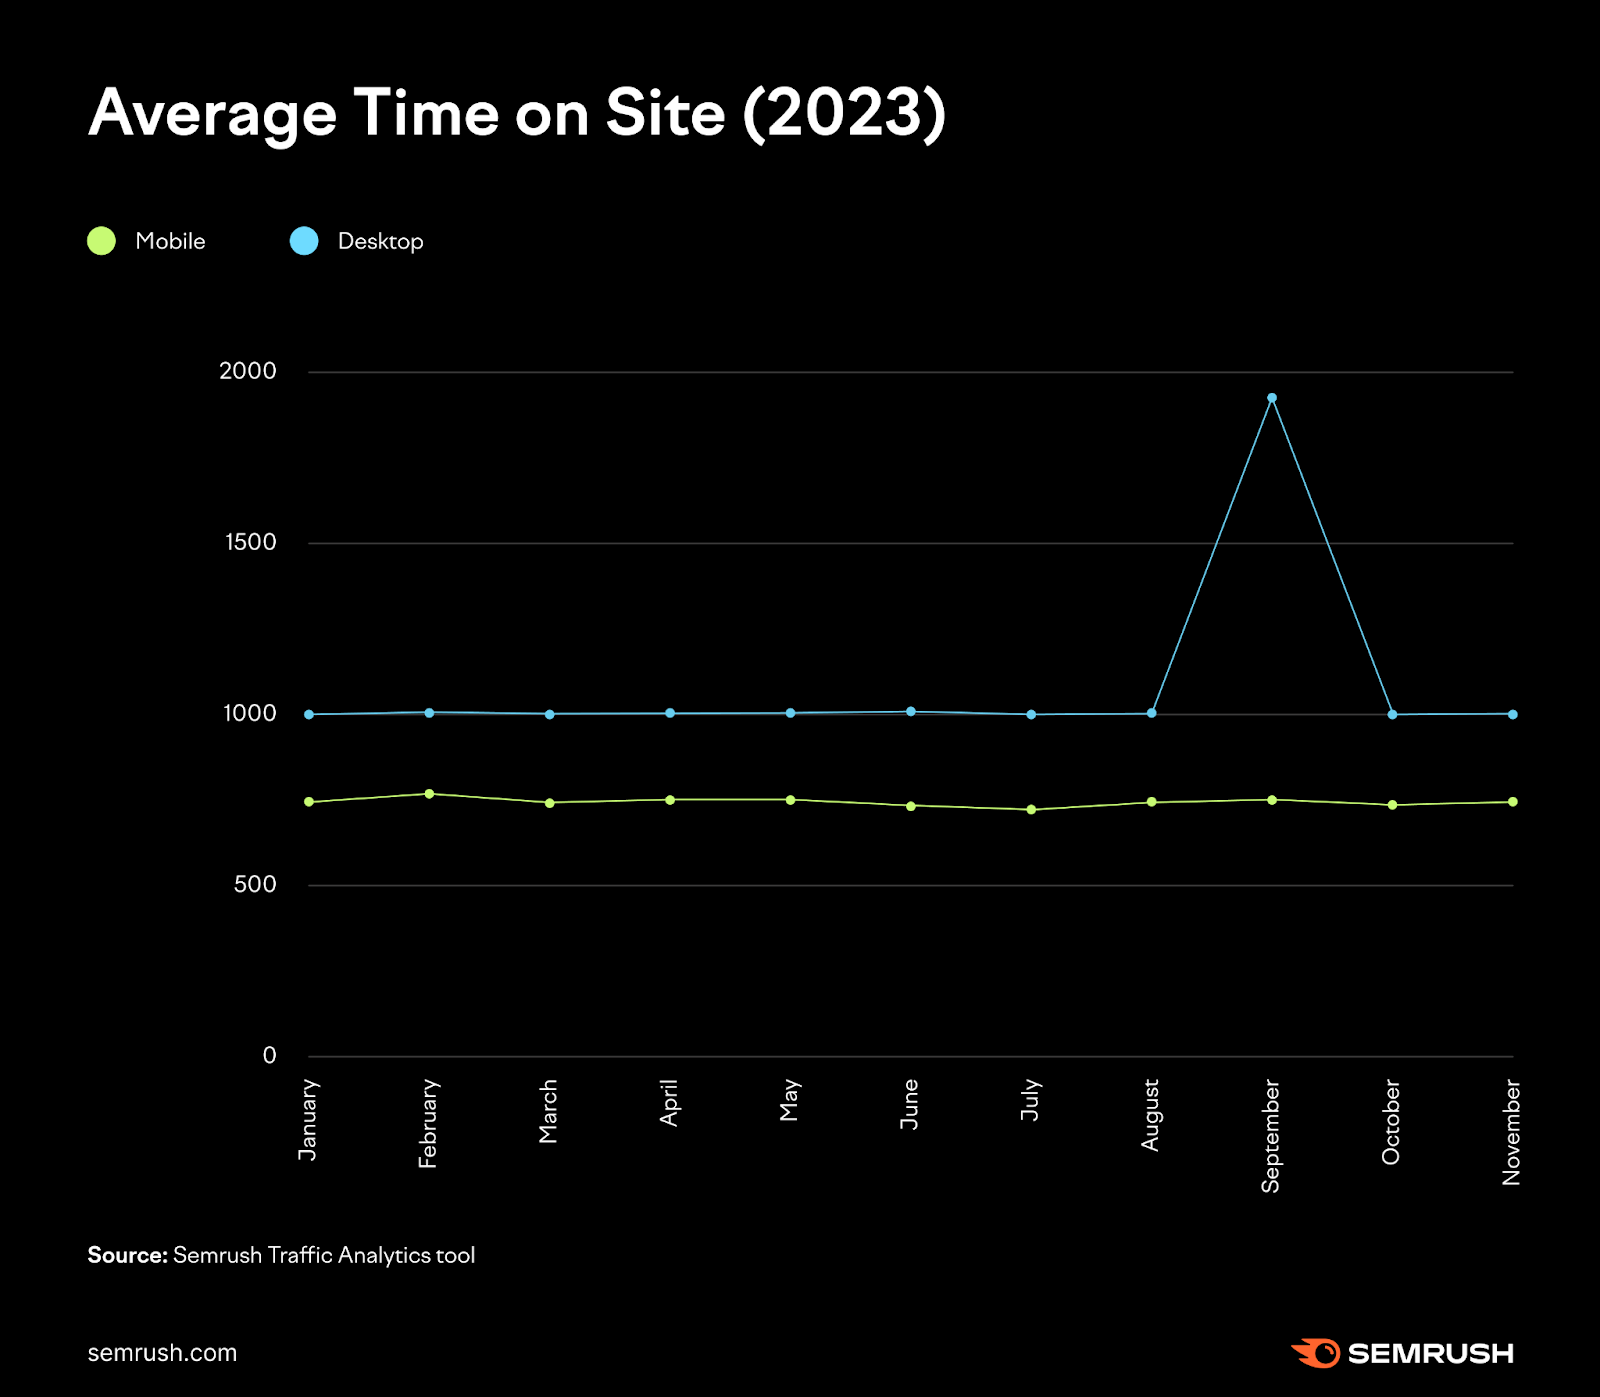 A graph showing average time on site in 2023, for desktop and mobile, using data from Traffic Analytics tool